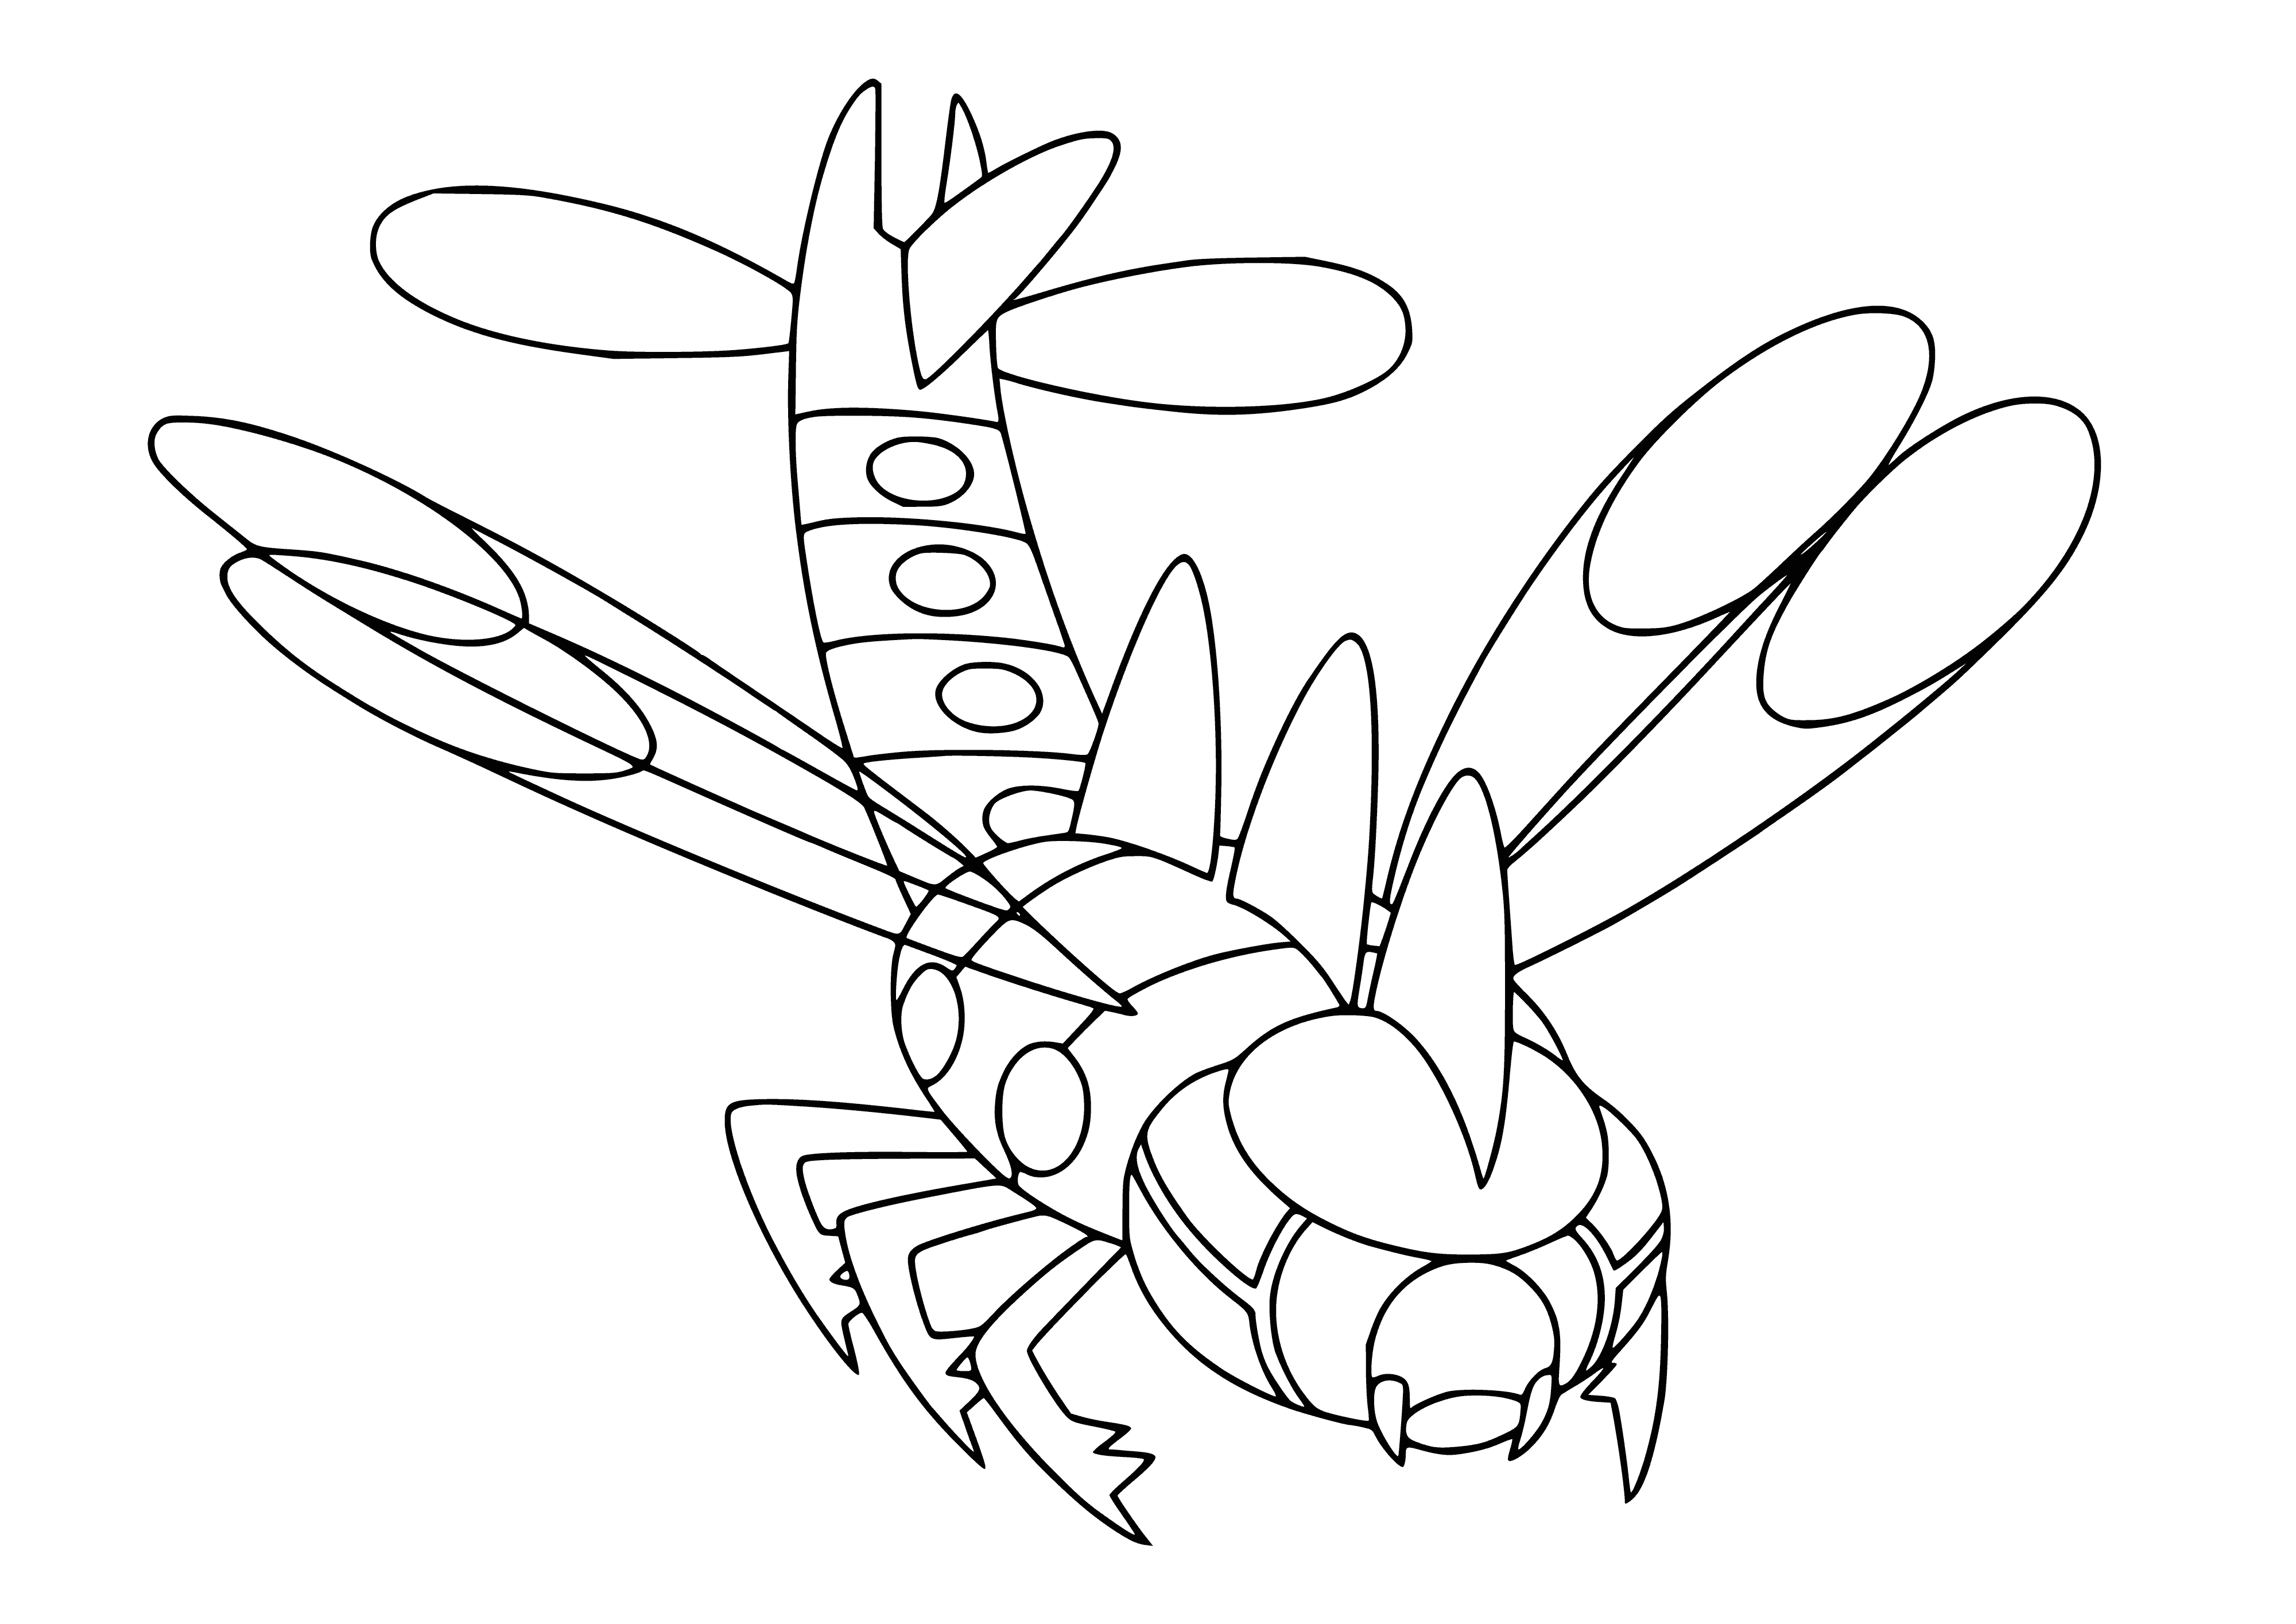 coloring page: Large, hawk-like Pokemon with dark blue body, white underbelly, 4 wings, large yellow eyes, and 2 long antennas.